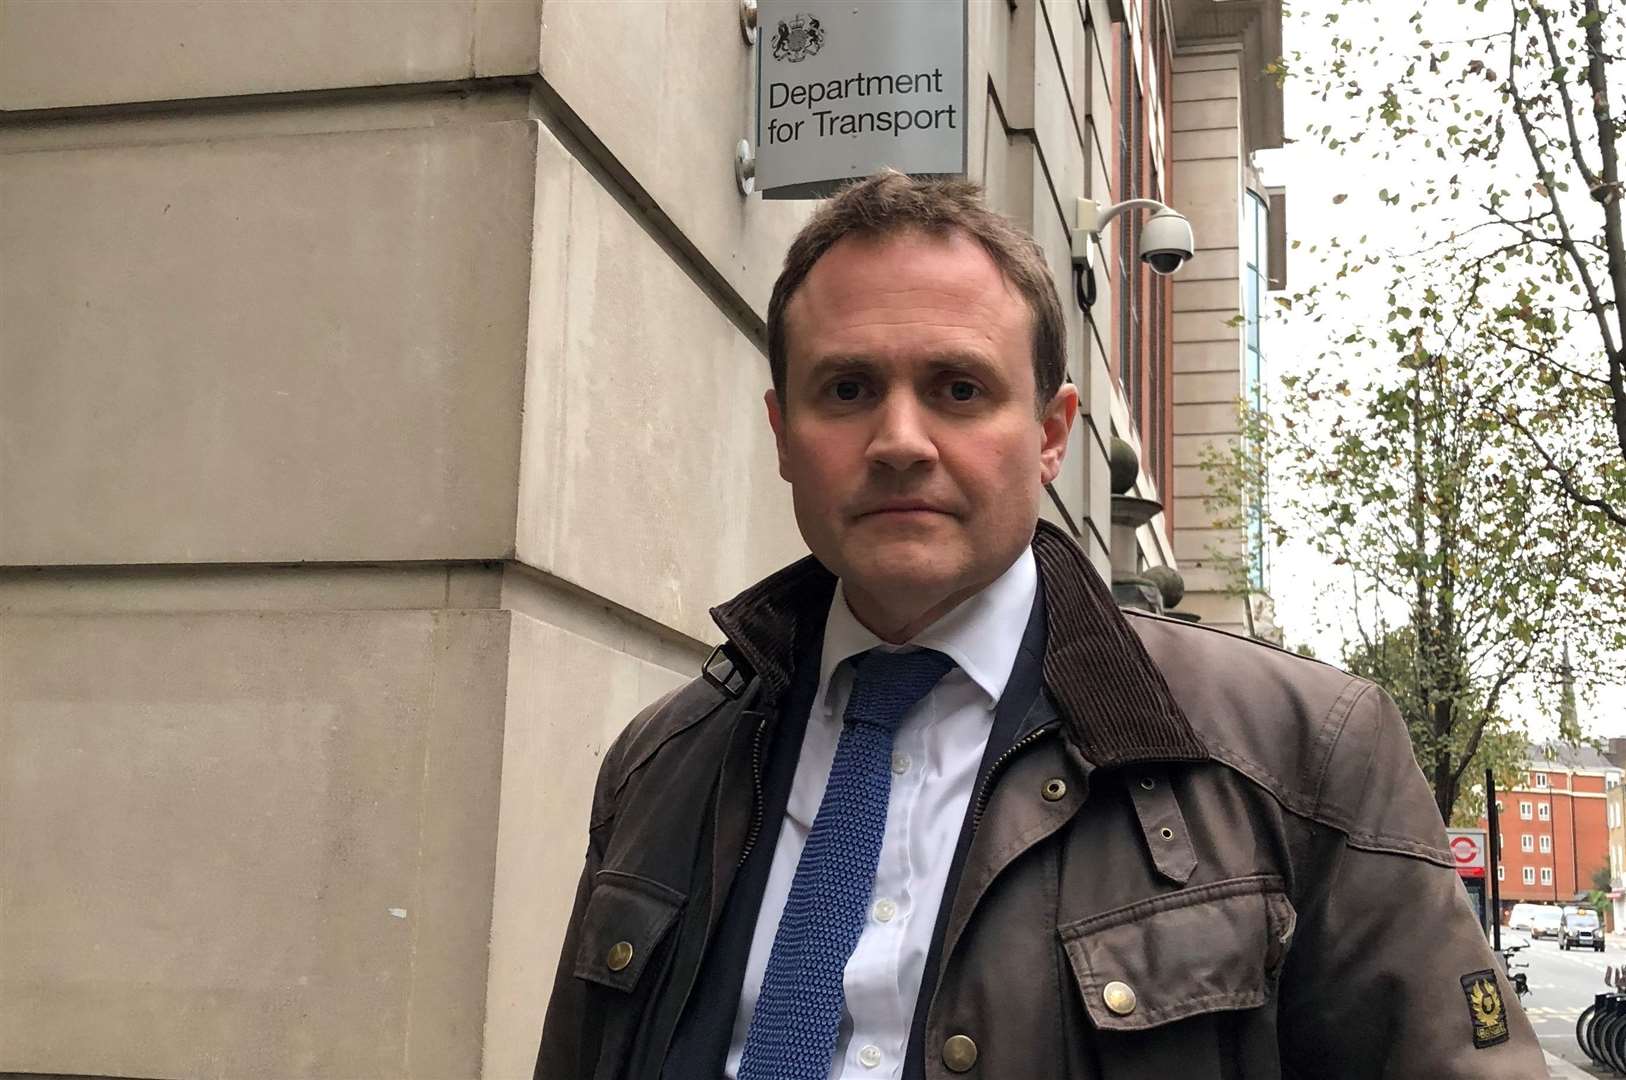 MP Tom Tugendhat is asking people to speak with him about issues they have with Royal Mail